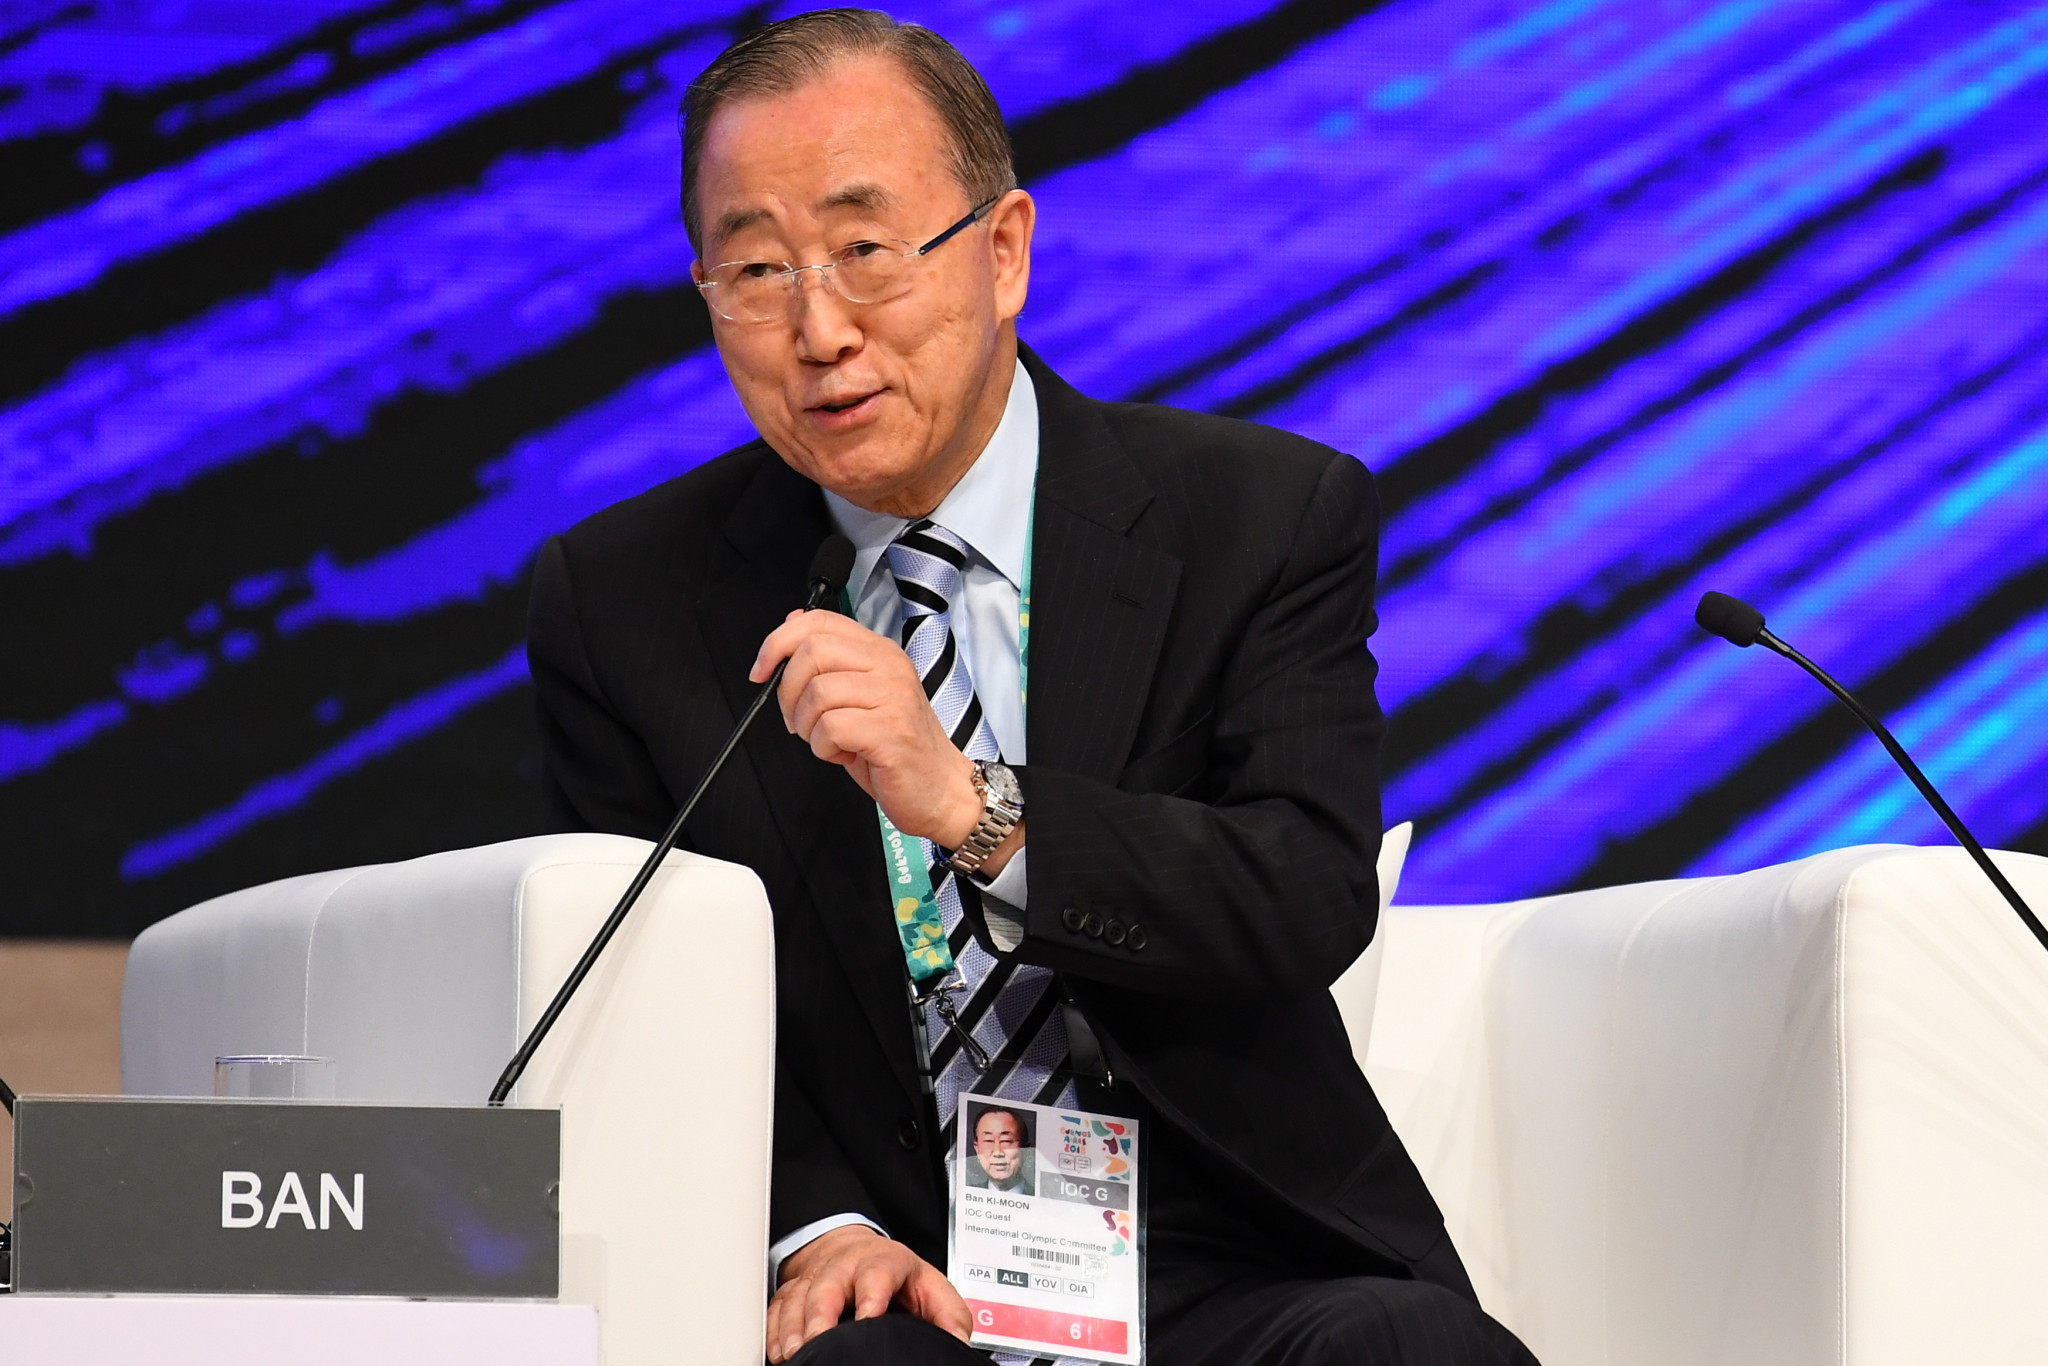 The Save Olympism Movement has reportedly written to former United Nations secretary general Ban Ki-moon, asking him to investigate ©Getty Images